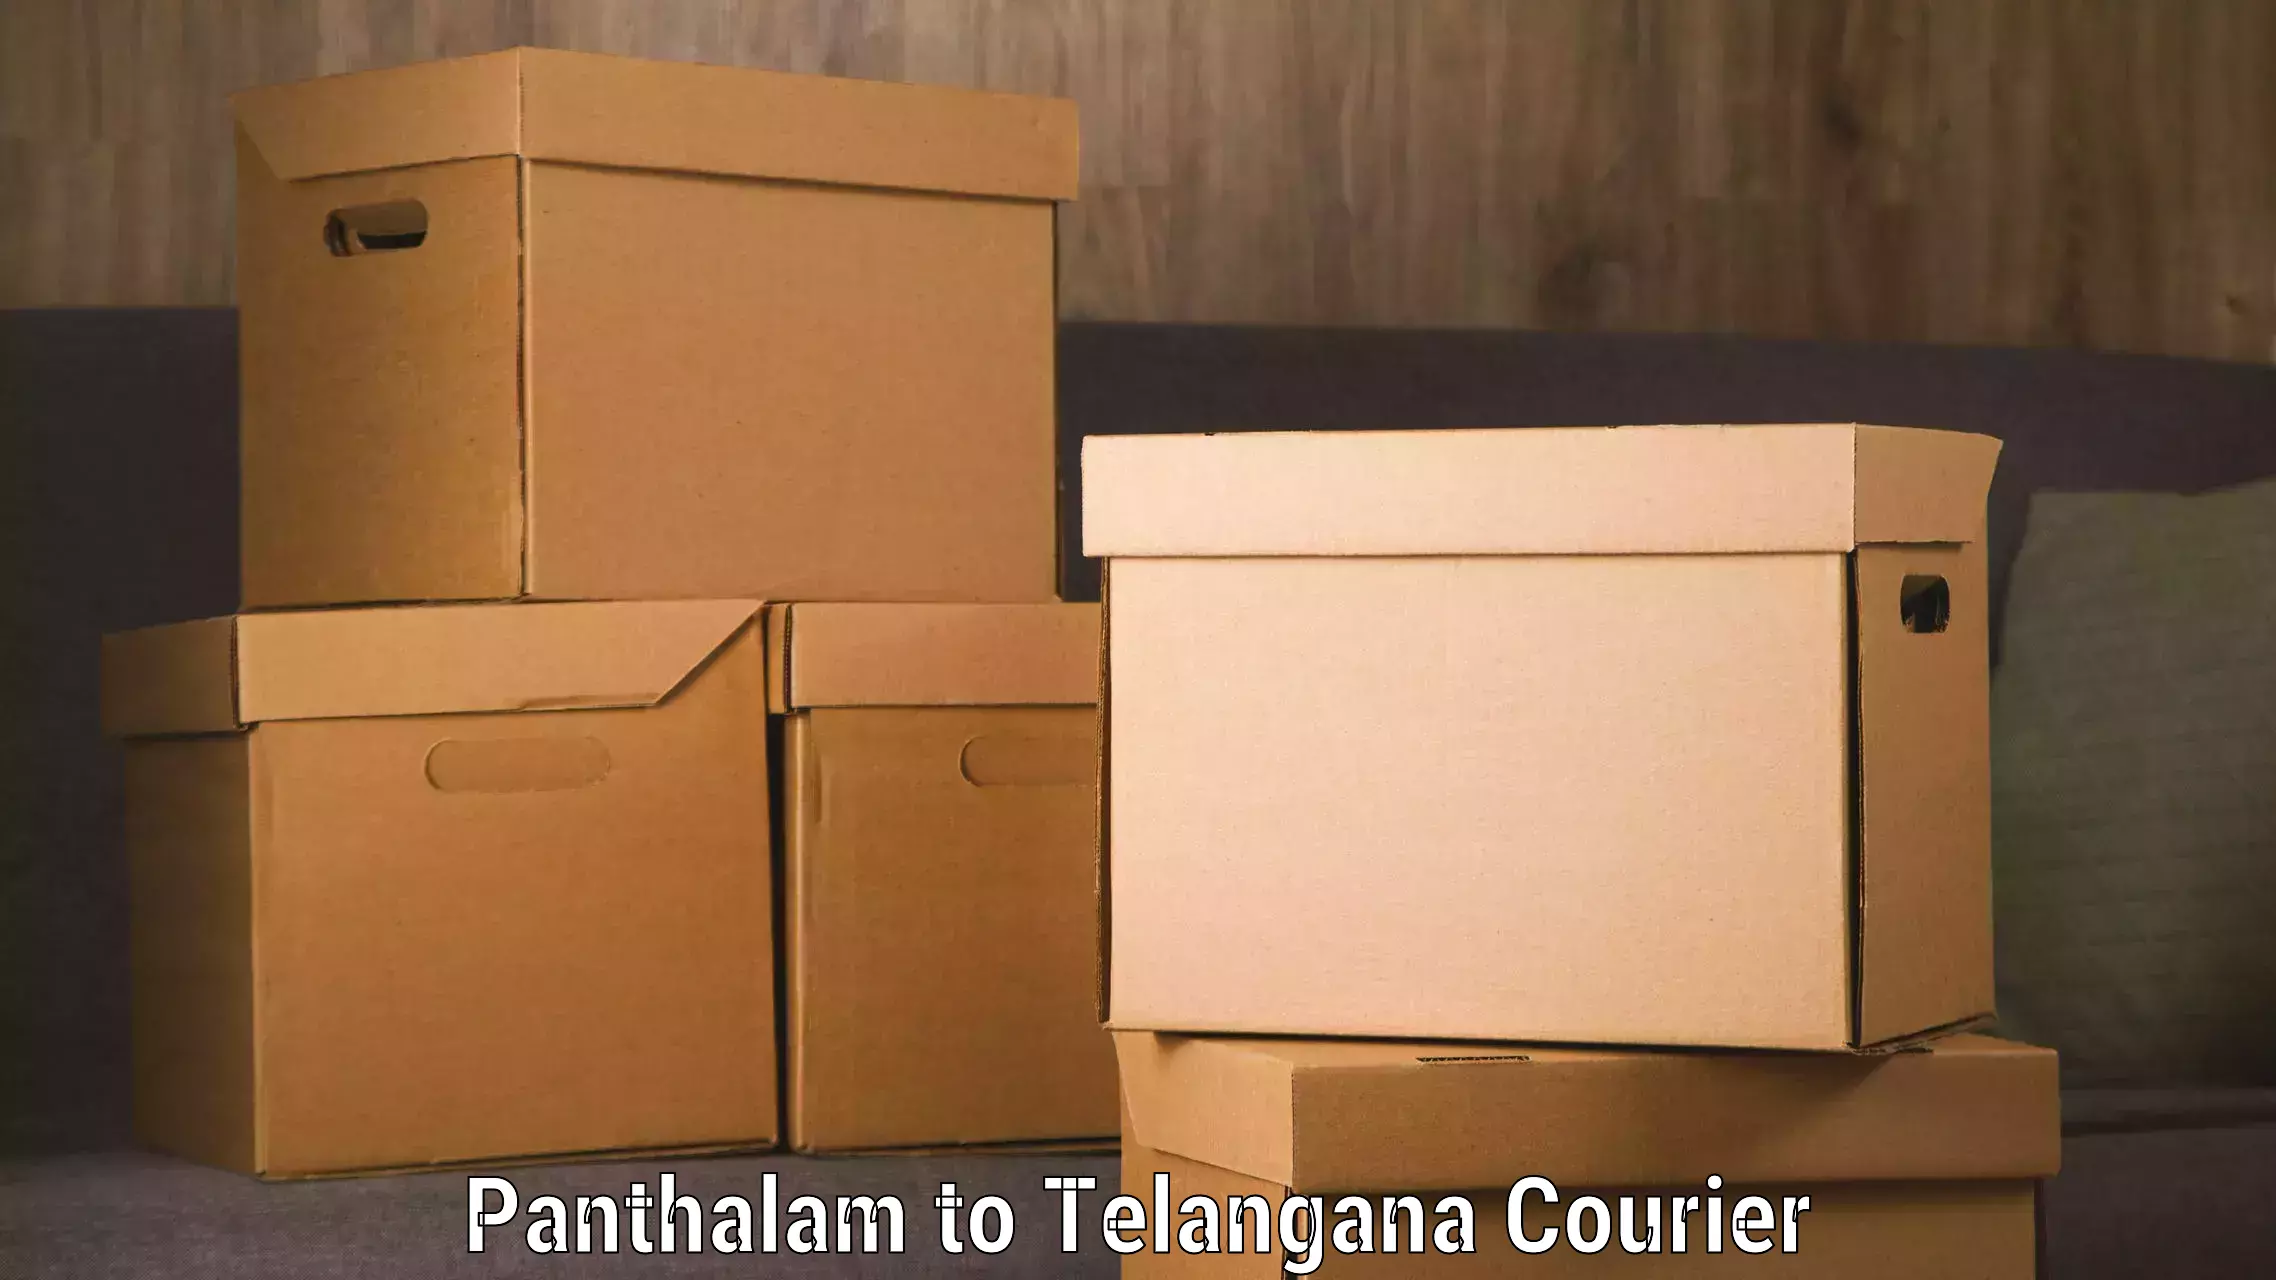 Multi-national courier services Panthalam to Sultanabad